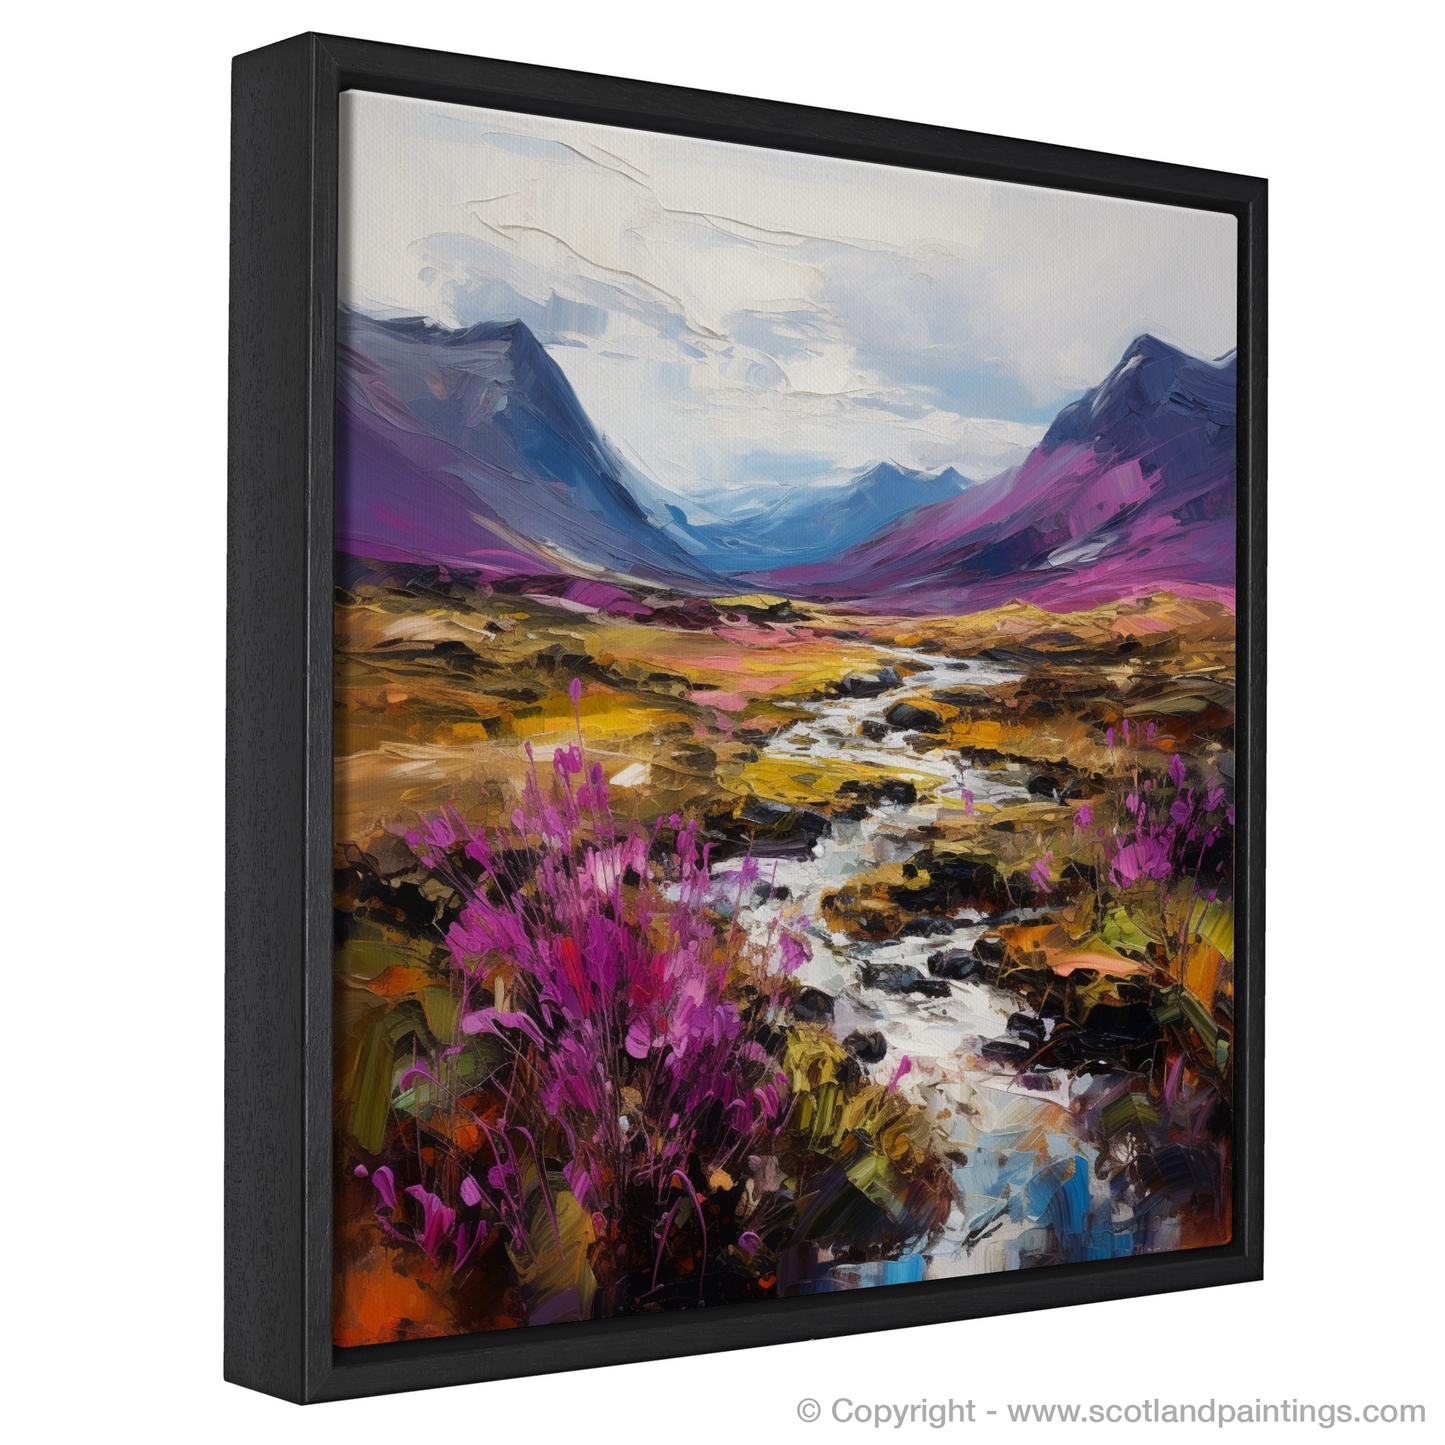 Painting and Art Print of Purple heather in Glencoe entitled "Heather's Embrace: An Expressionist Homage to Glencoe".